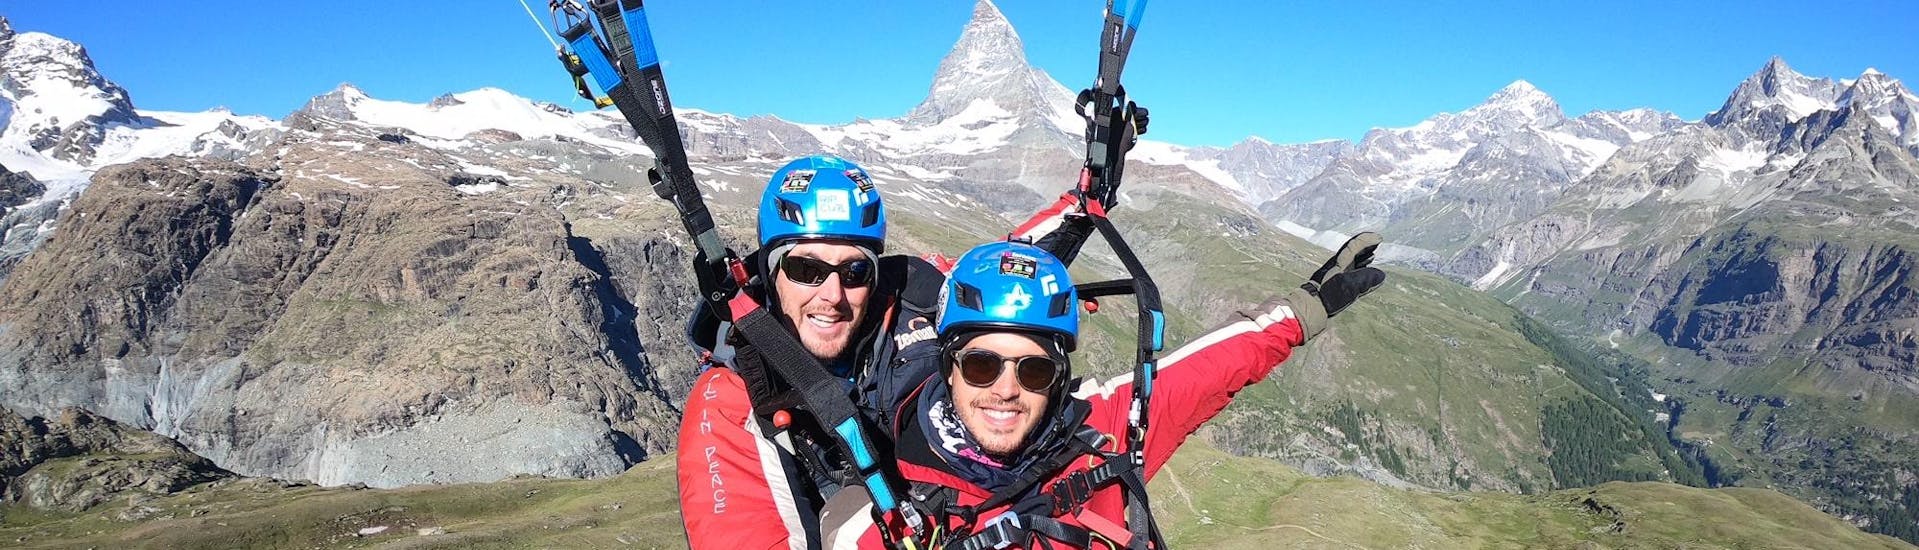 A paragliding guide from Matterhorn Paragliding with a man paragliding in the mountains above Zermatt. 